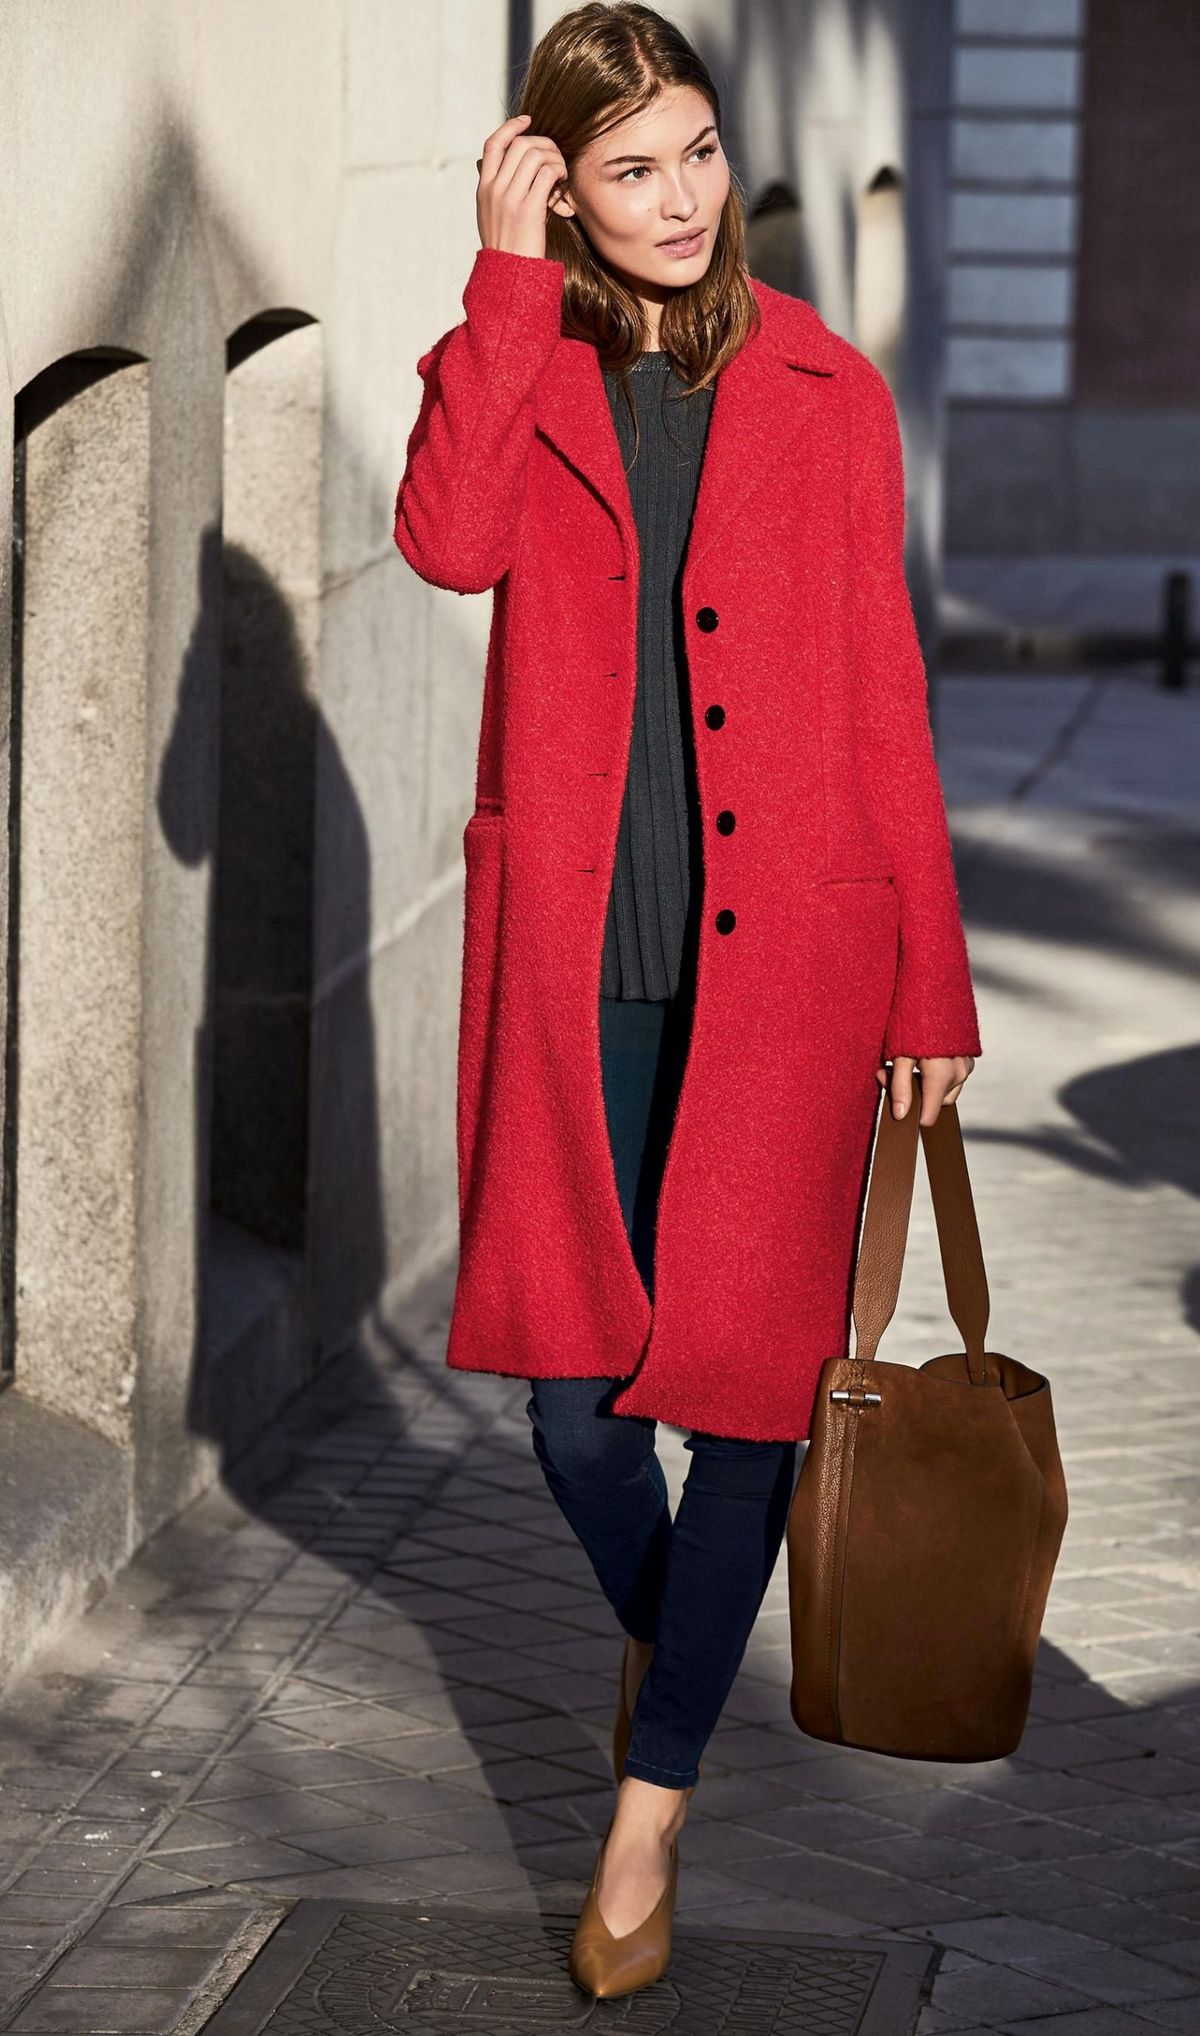 Cheap winter coats: Our pick of the most stylish coats under £80